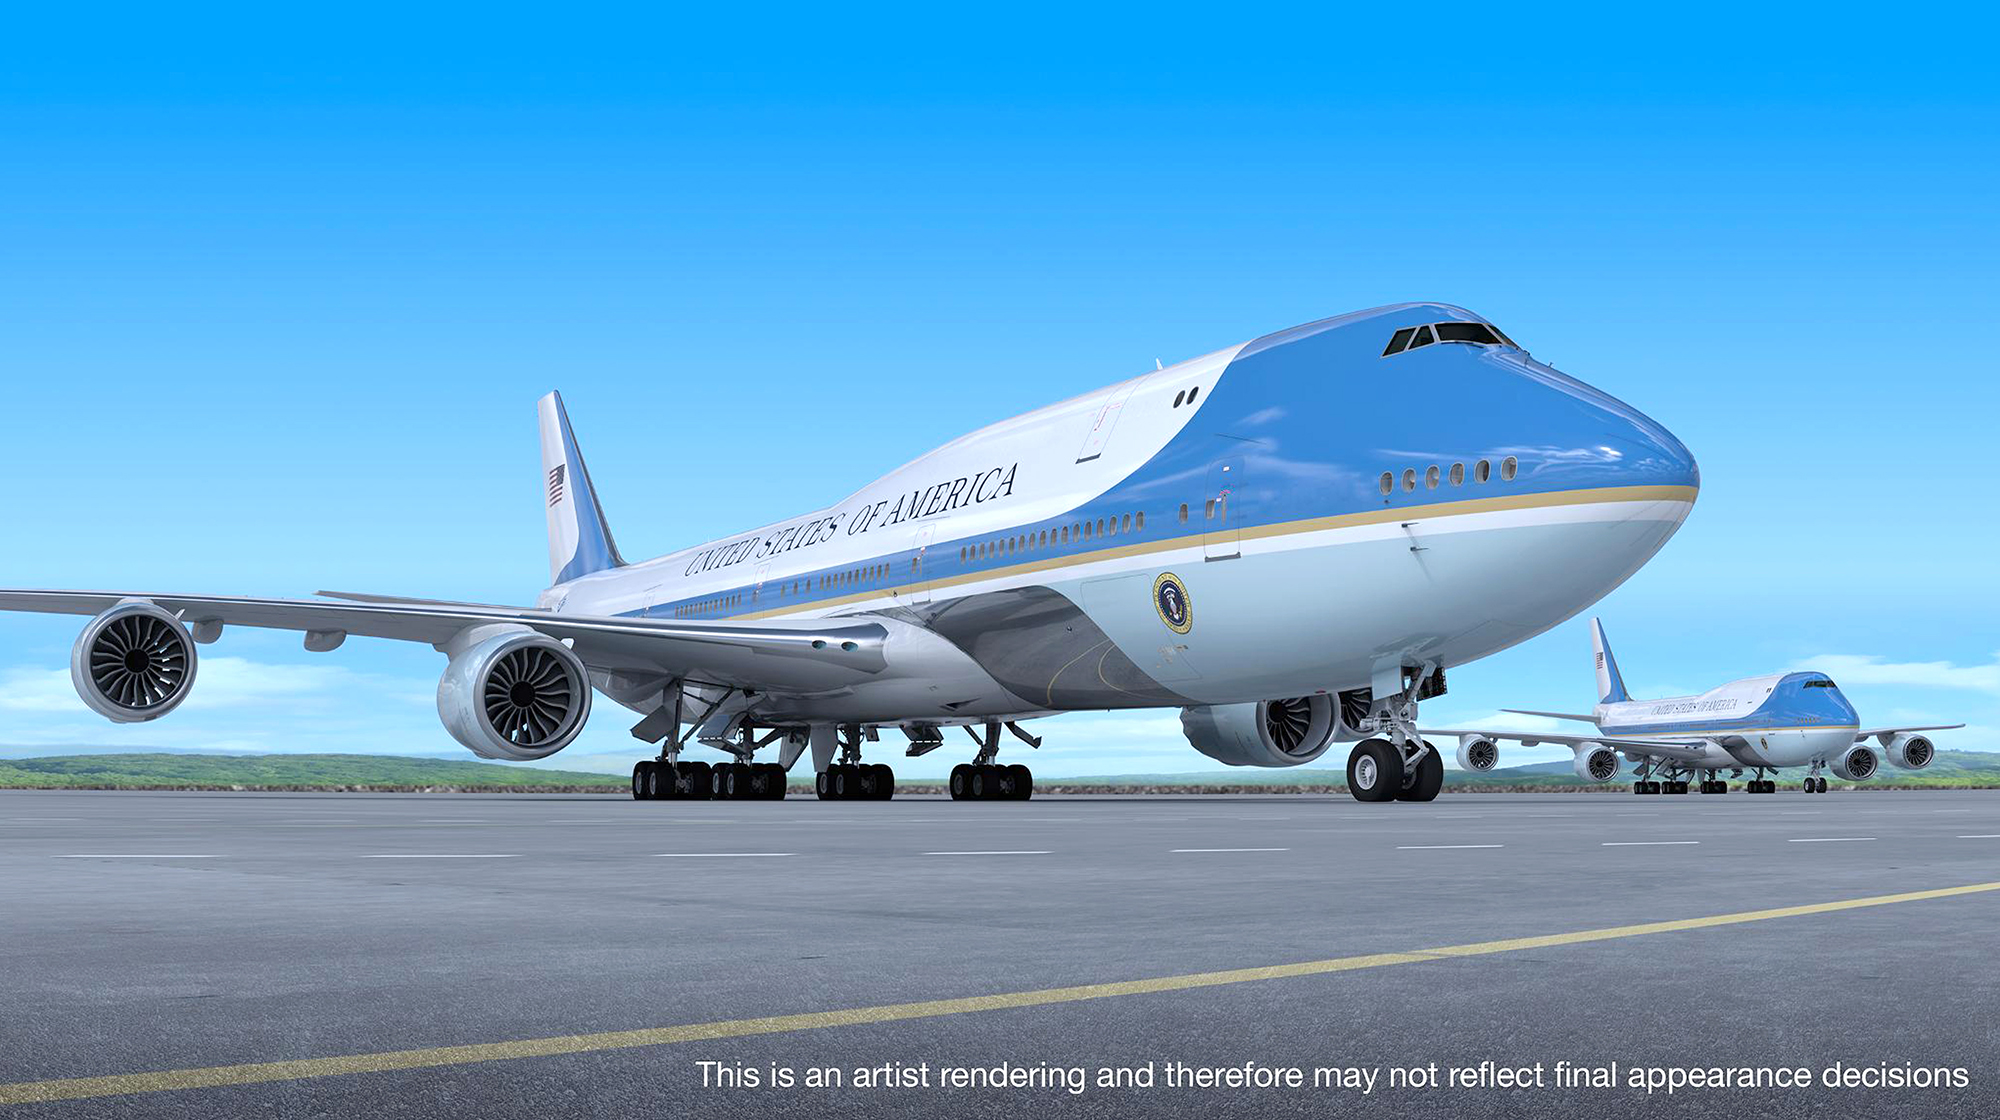 Buying a New Air Force One Is Complicated - Defense One